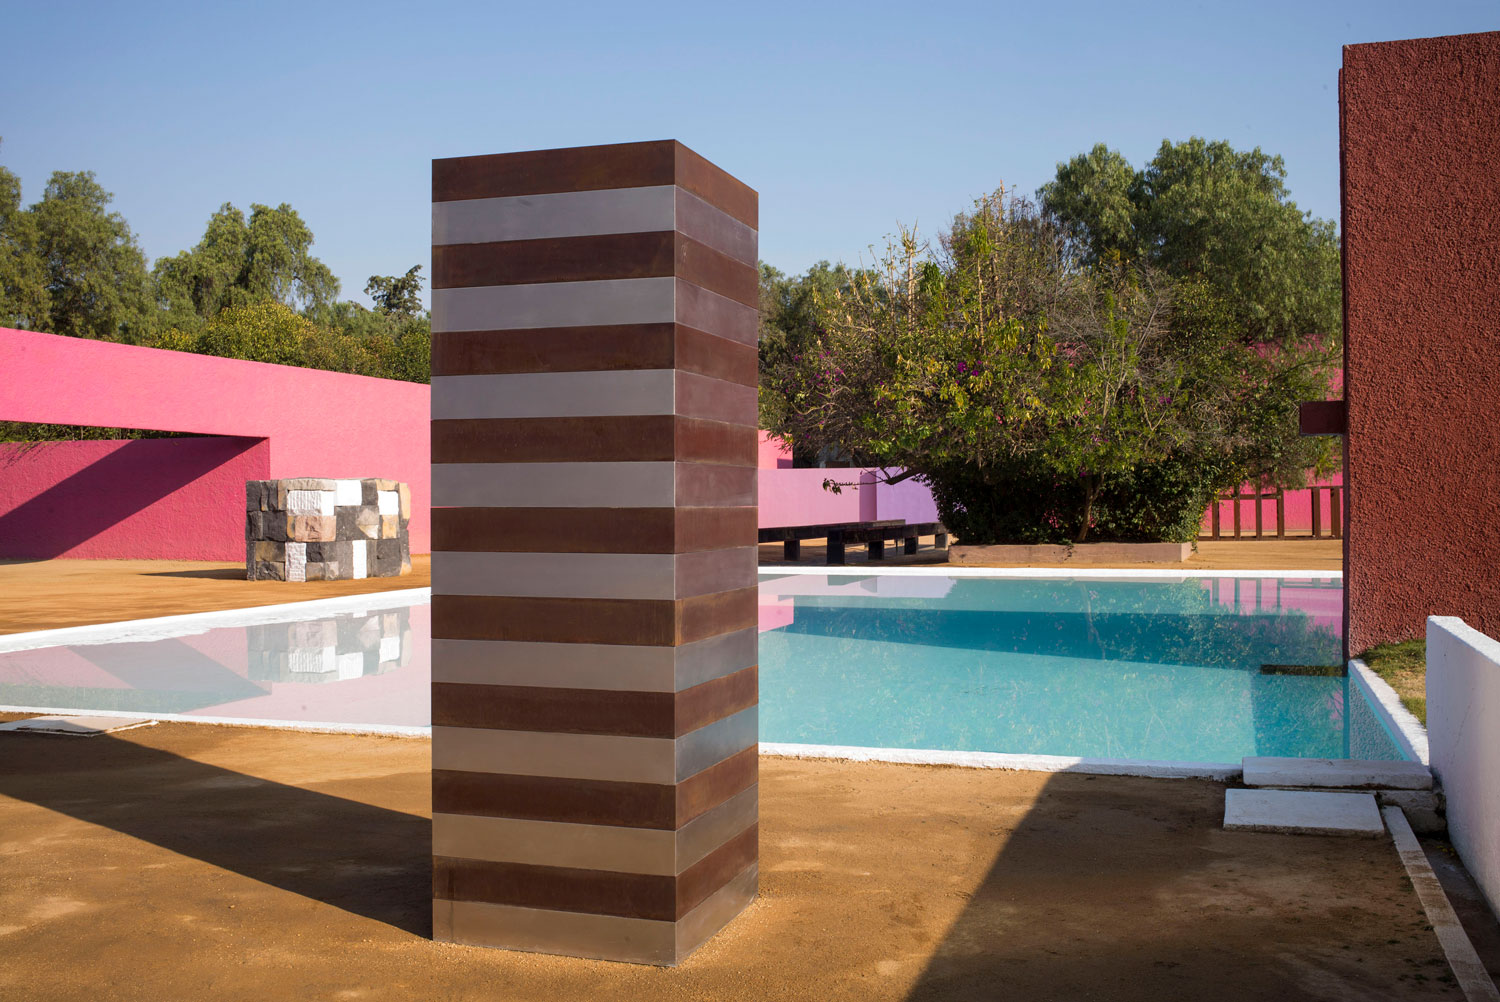 Sean Scully's Abstract Masterpieces Take Over a Mexico City Landmark ...